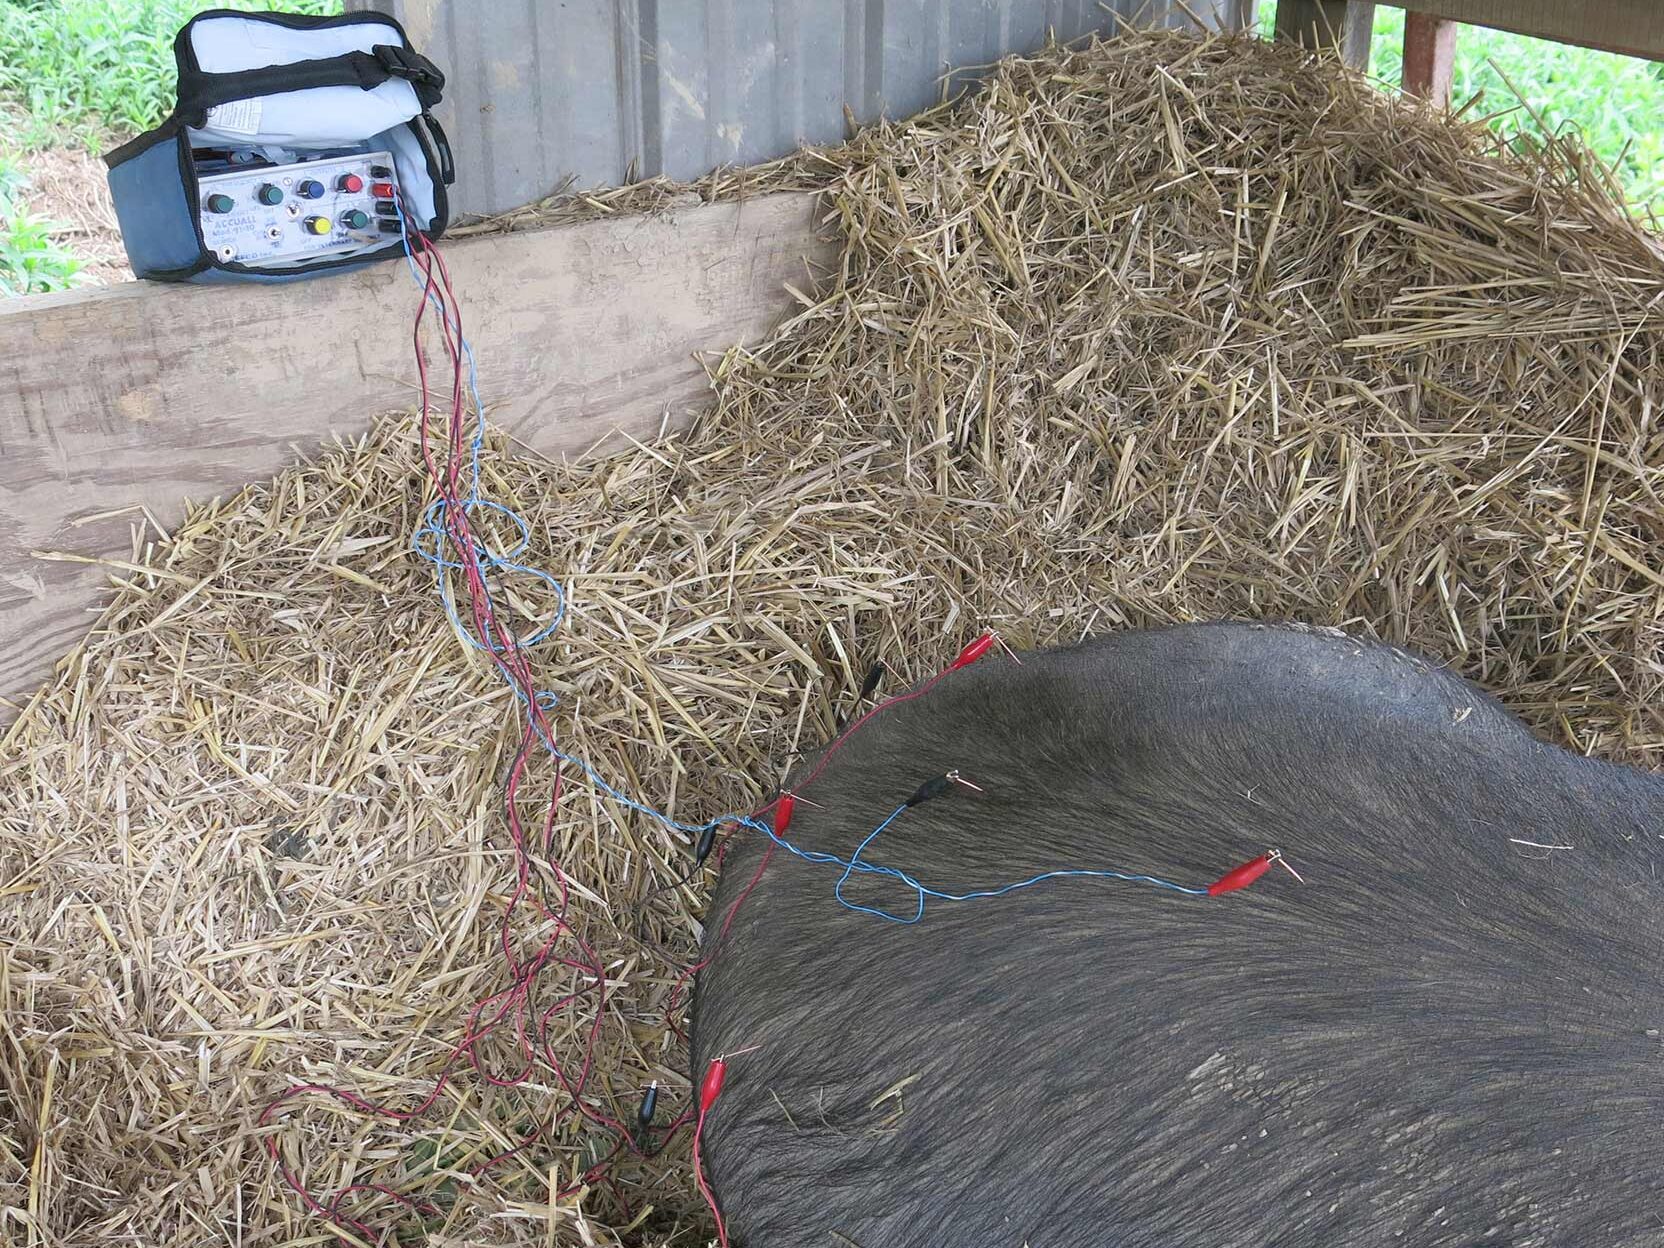 Pig laying in hay in barn with acupuncture needles in its back, needles are attached to an electric source to provide electro acupuncture